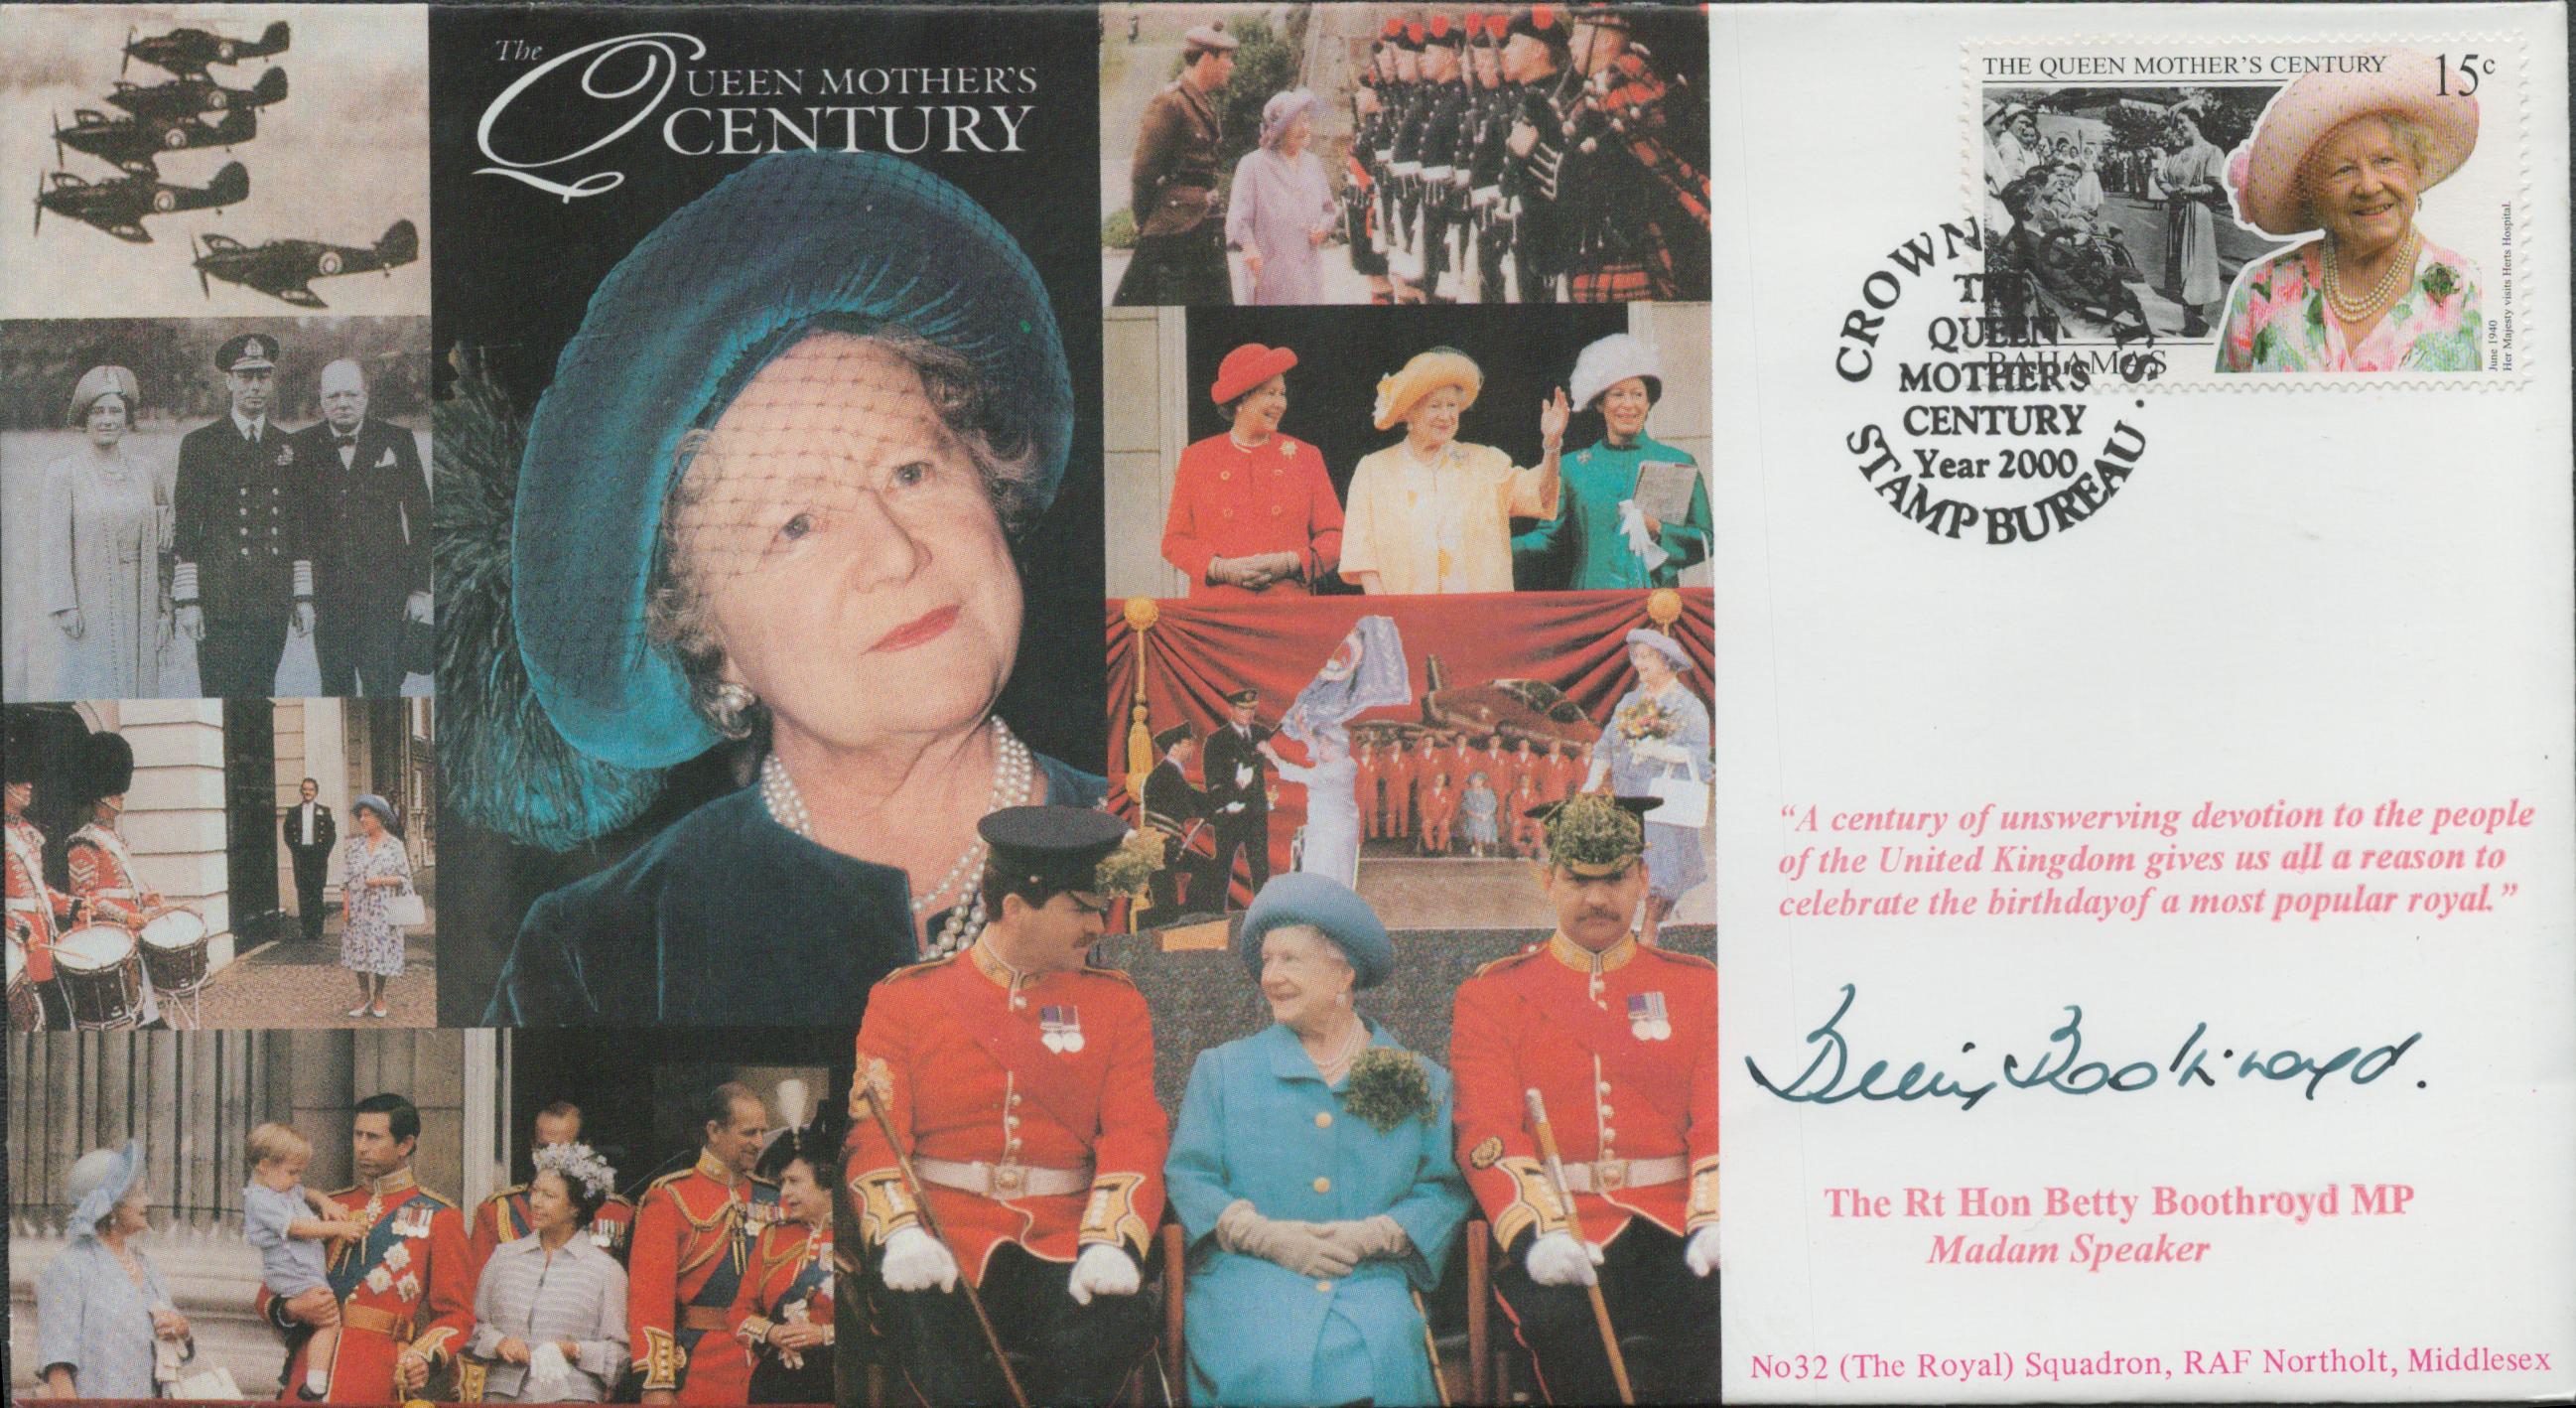 Rt Hon Betty Boothroyd MP signed The Queen Mothers Century FDC. Good Condition. All autographs